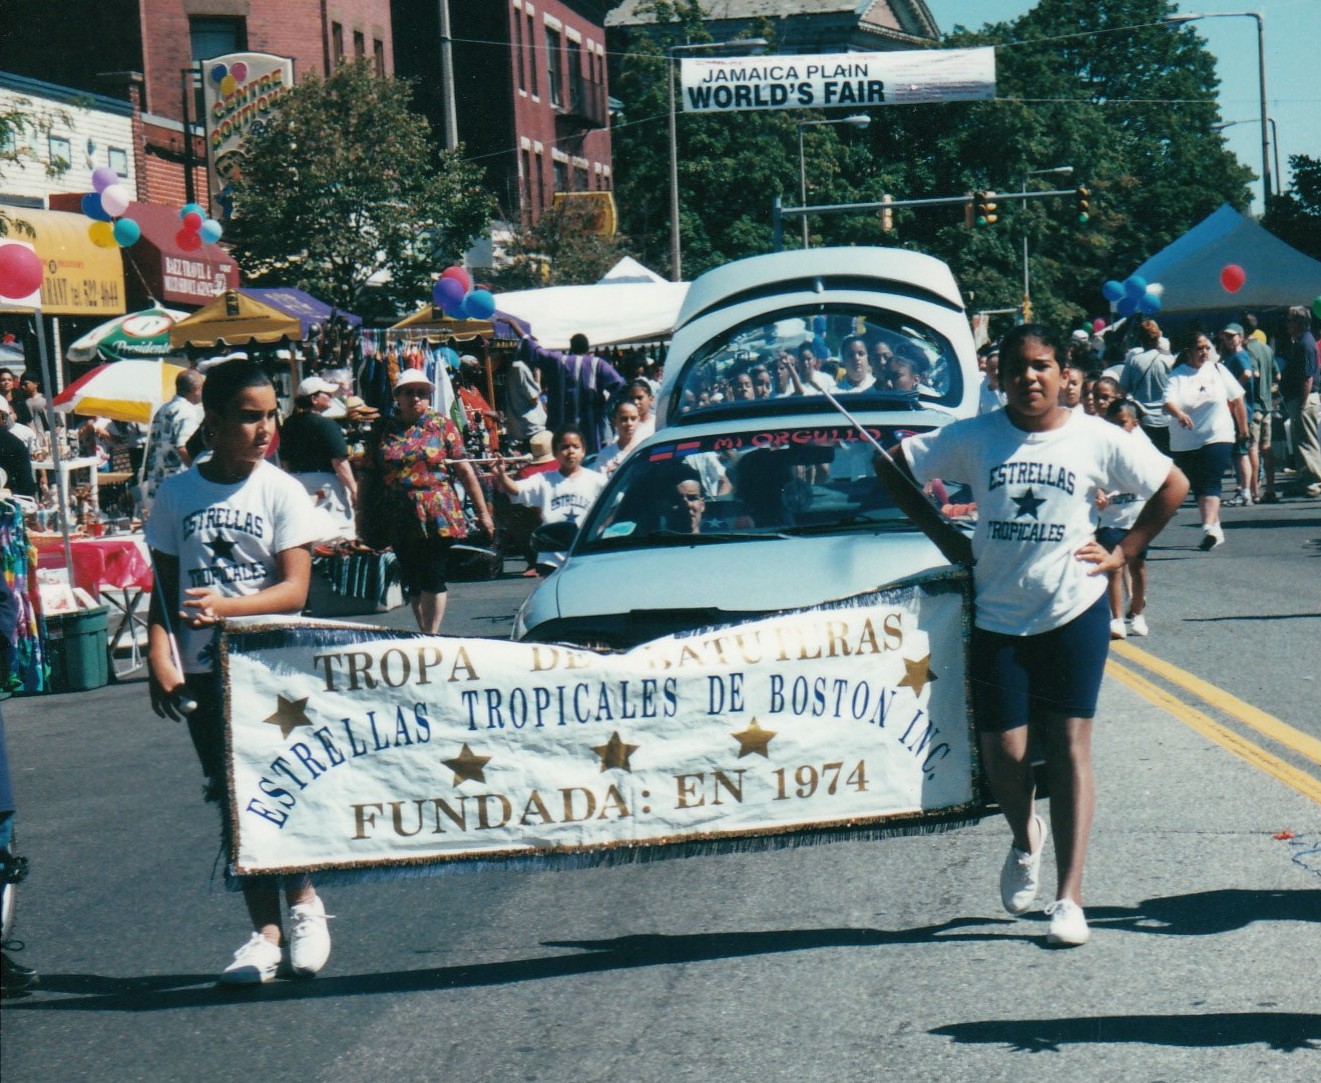 Two Youth Carrying A Banner In A Parade For The Jamaica Plain World's Fair, With A Bustling Street Fair In The Background.